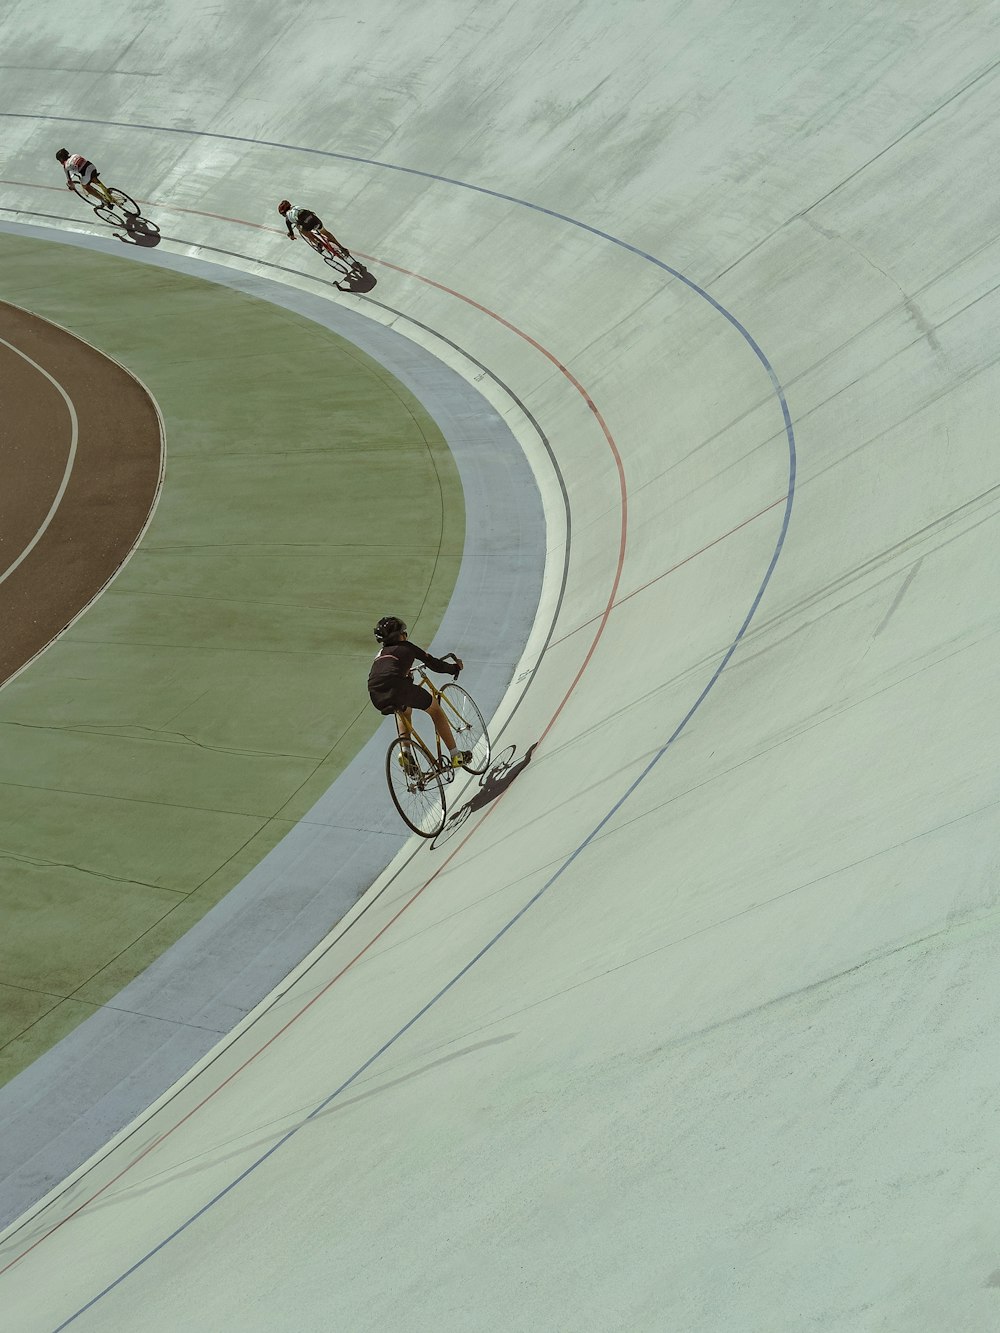 a person riding a bike on a track